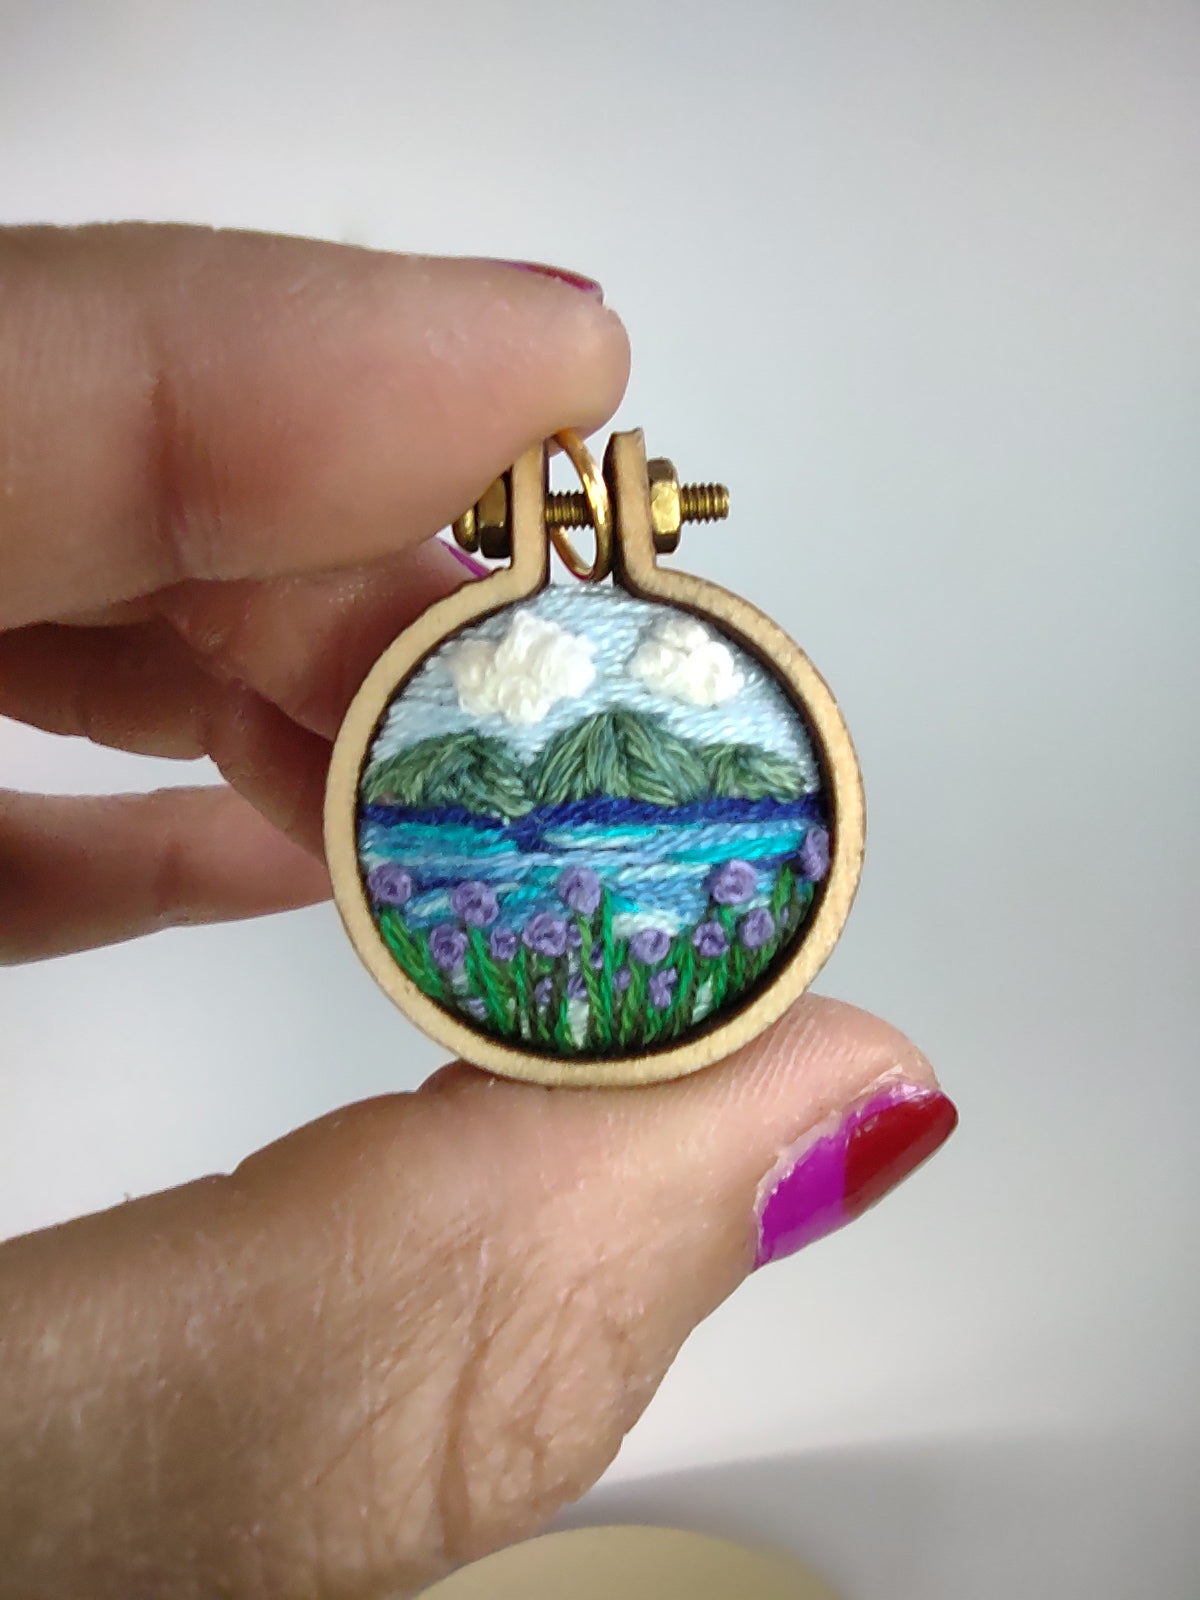 Handmade Embroidered Mountain Lake Landscape Pendant Necklace